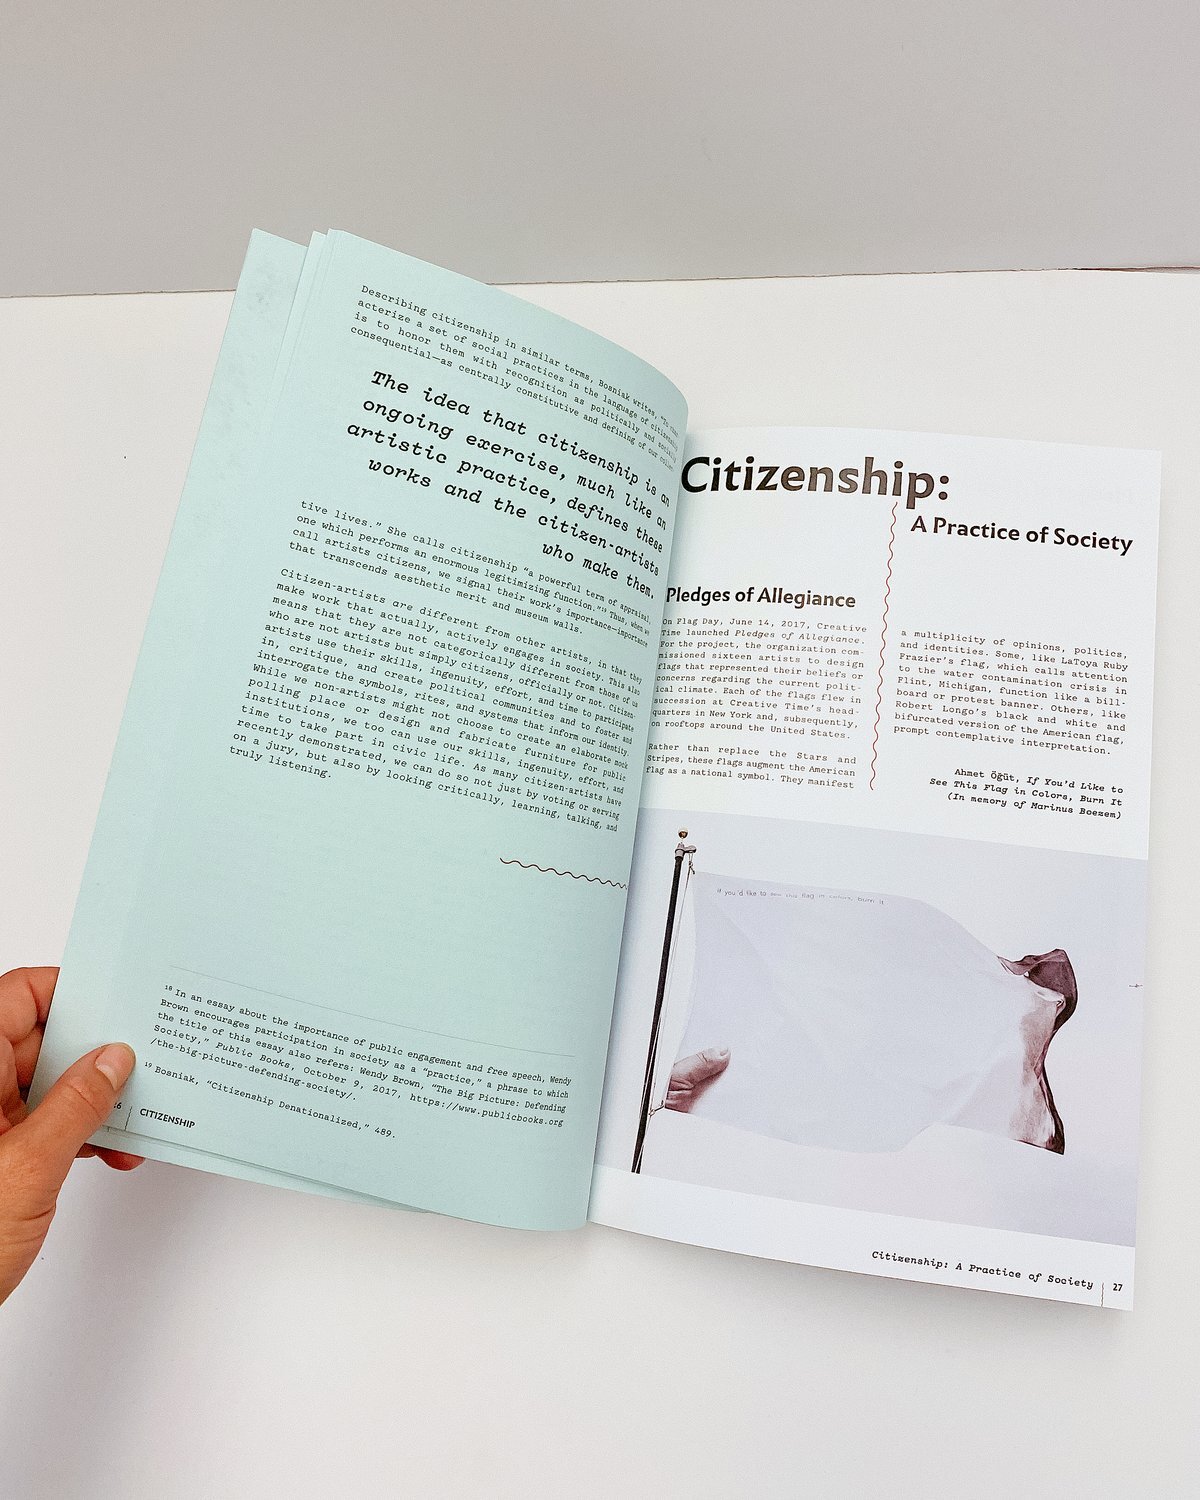 Image of an open Citizenship catalogue, on the left side is teal page with text and on the right page is a white page with text and an image of a flag. The catalogue is held open by a white hand on the bottom left.